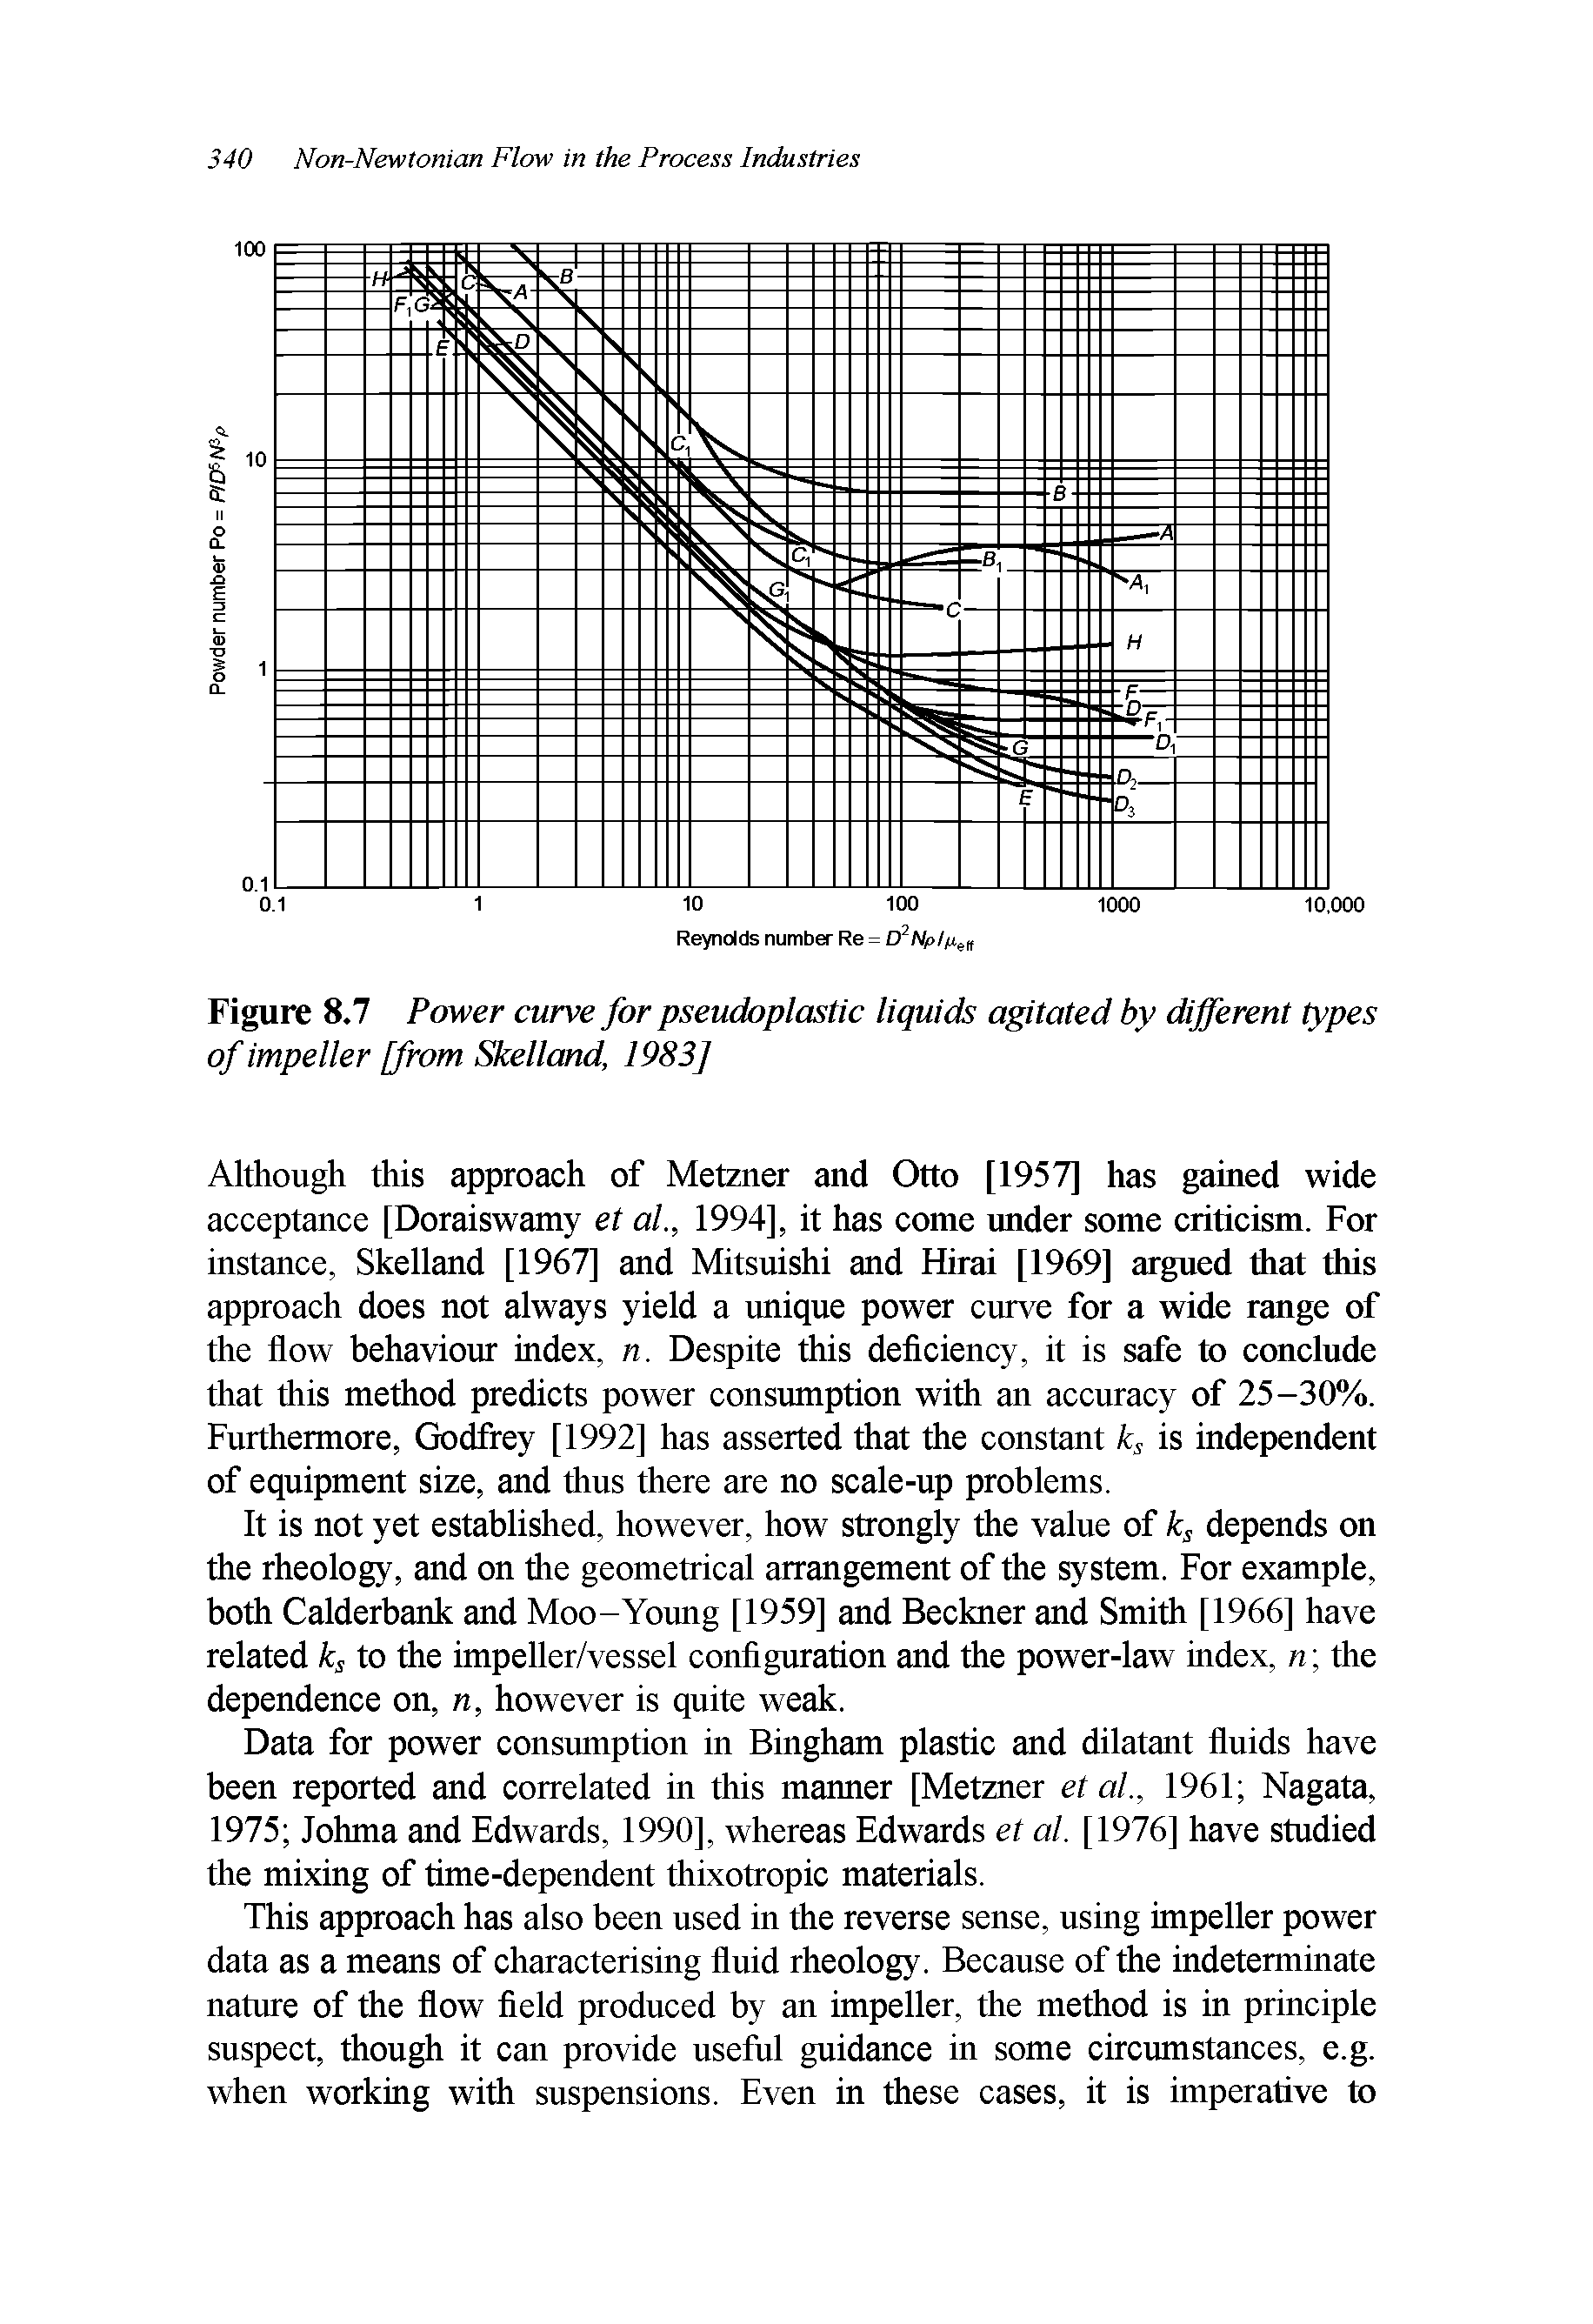 Figure 8.7 Power curve for pseudoplastic liquids agitated by different types of impeller [from Skelland, 1983]...